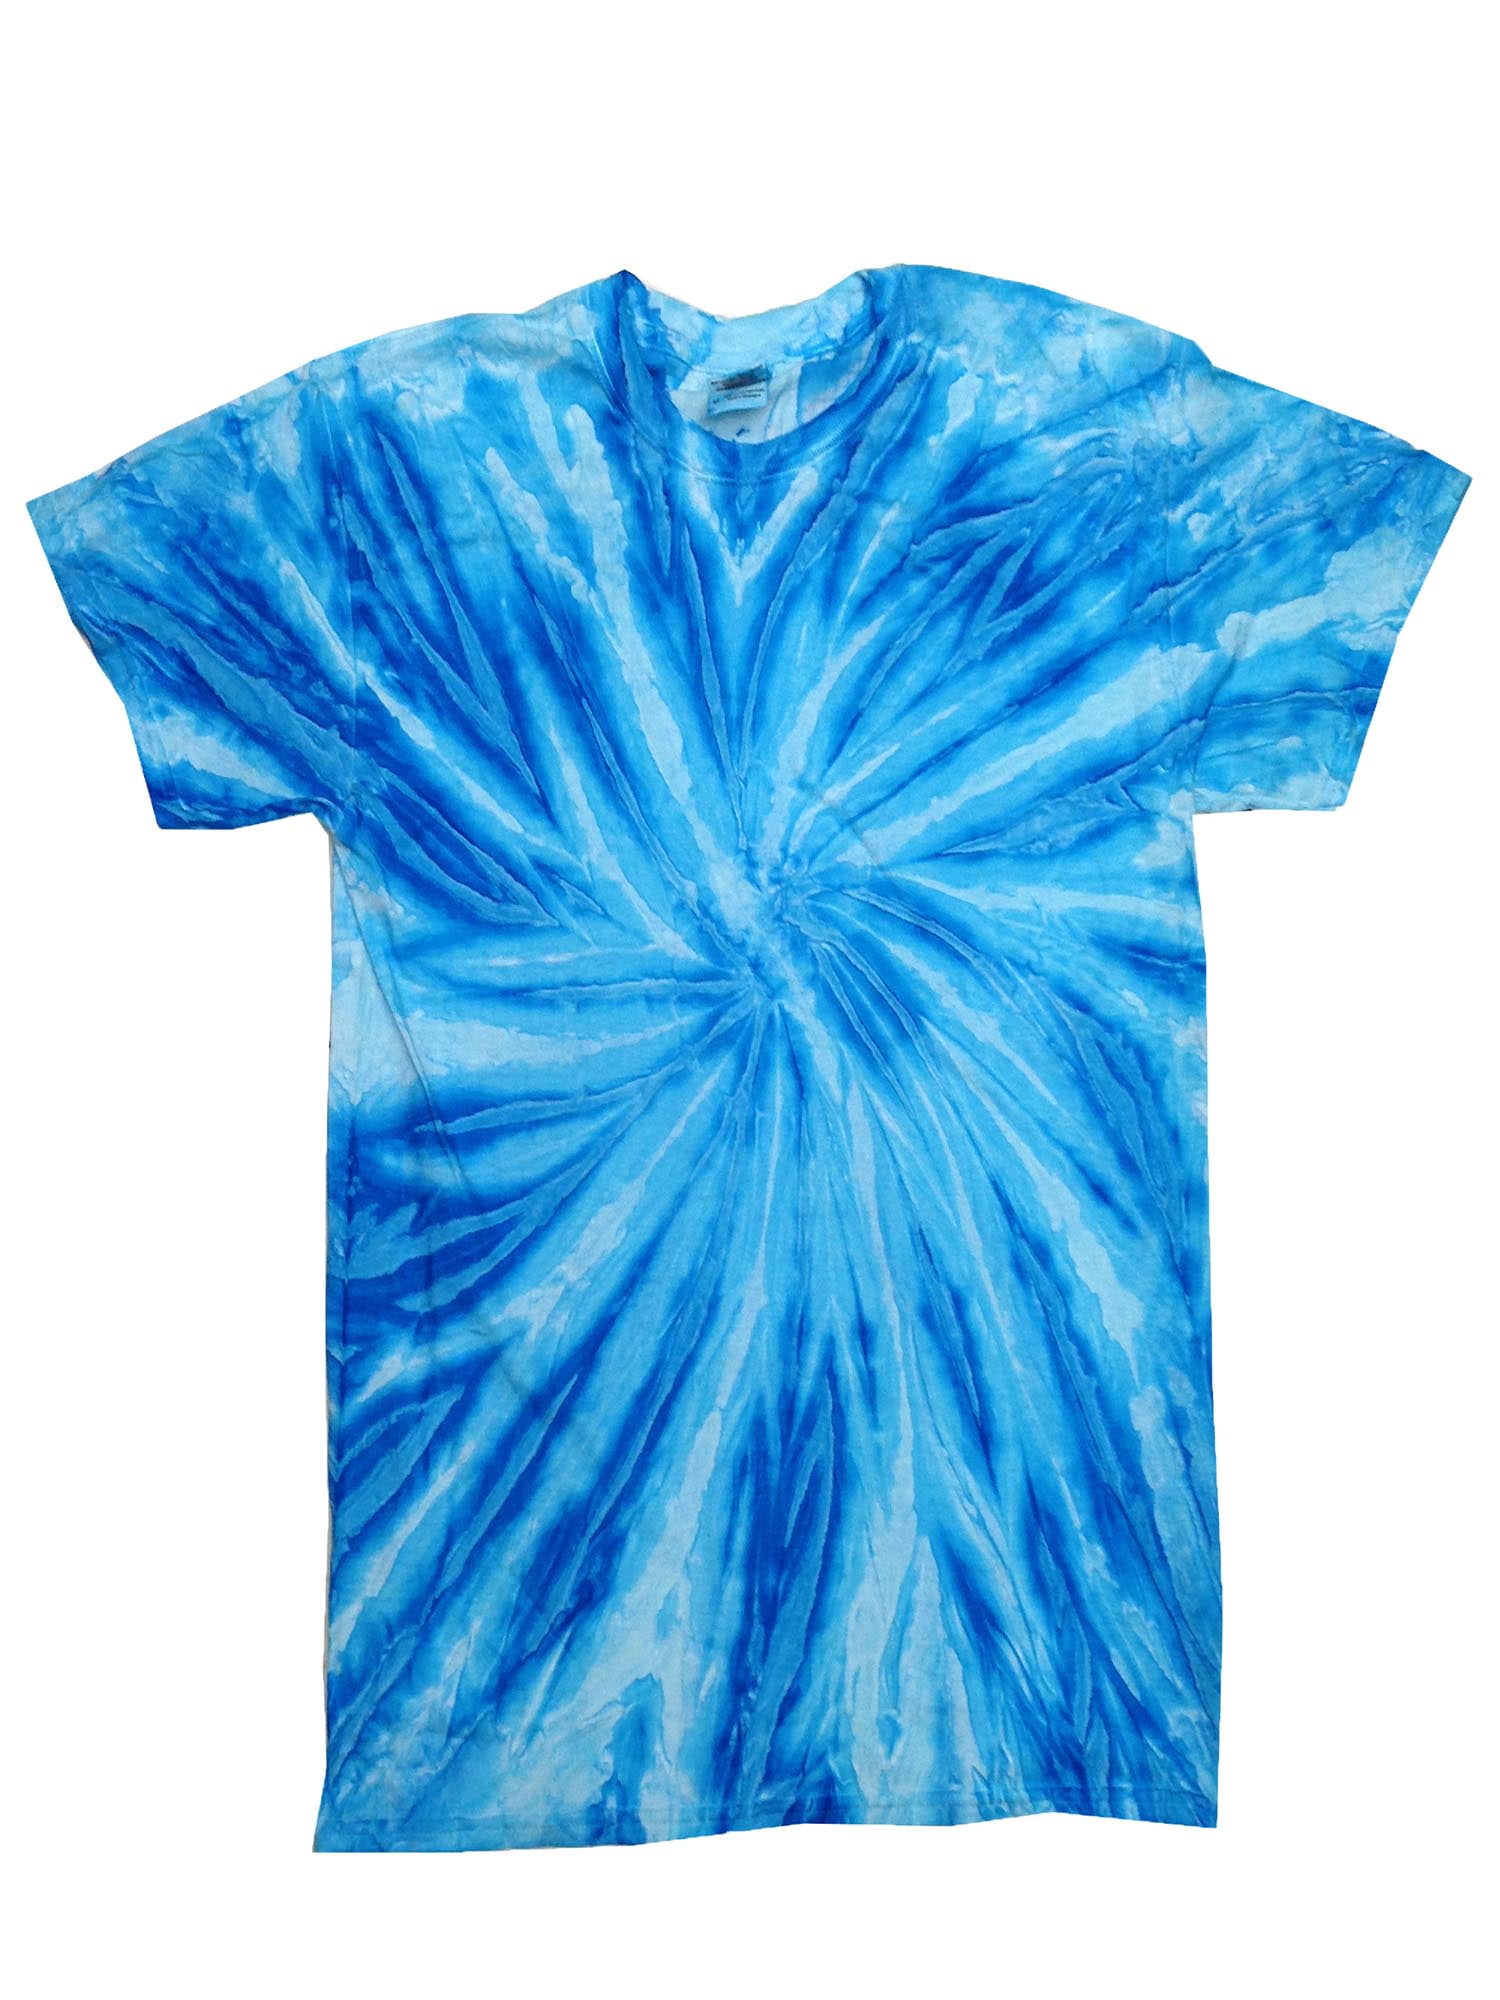 43+ can you dye a shirt with food coloring Diffusion: water & food dye ...